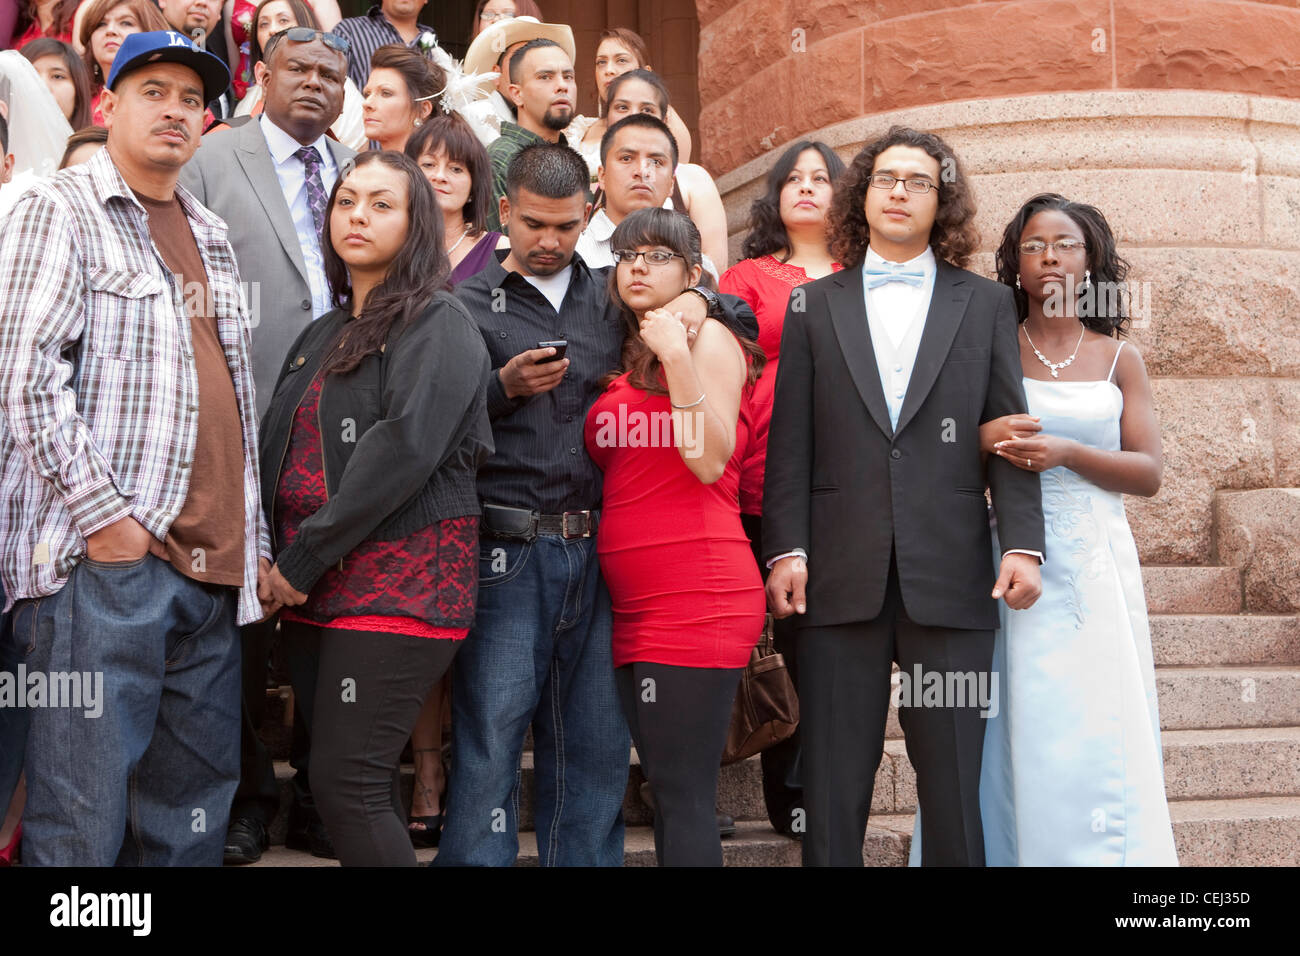 Large group of  couples married during mass wedding ceremony at courthouse where many wore non-traditional informal attire Stock Photo